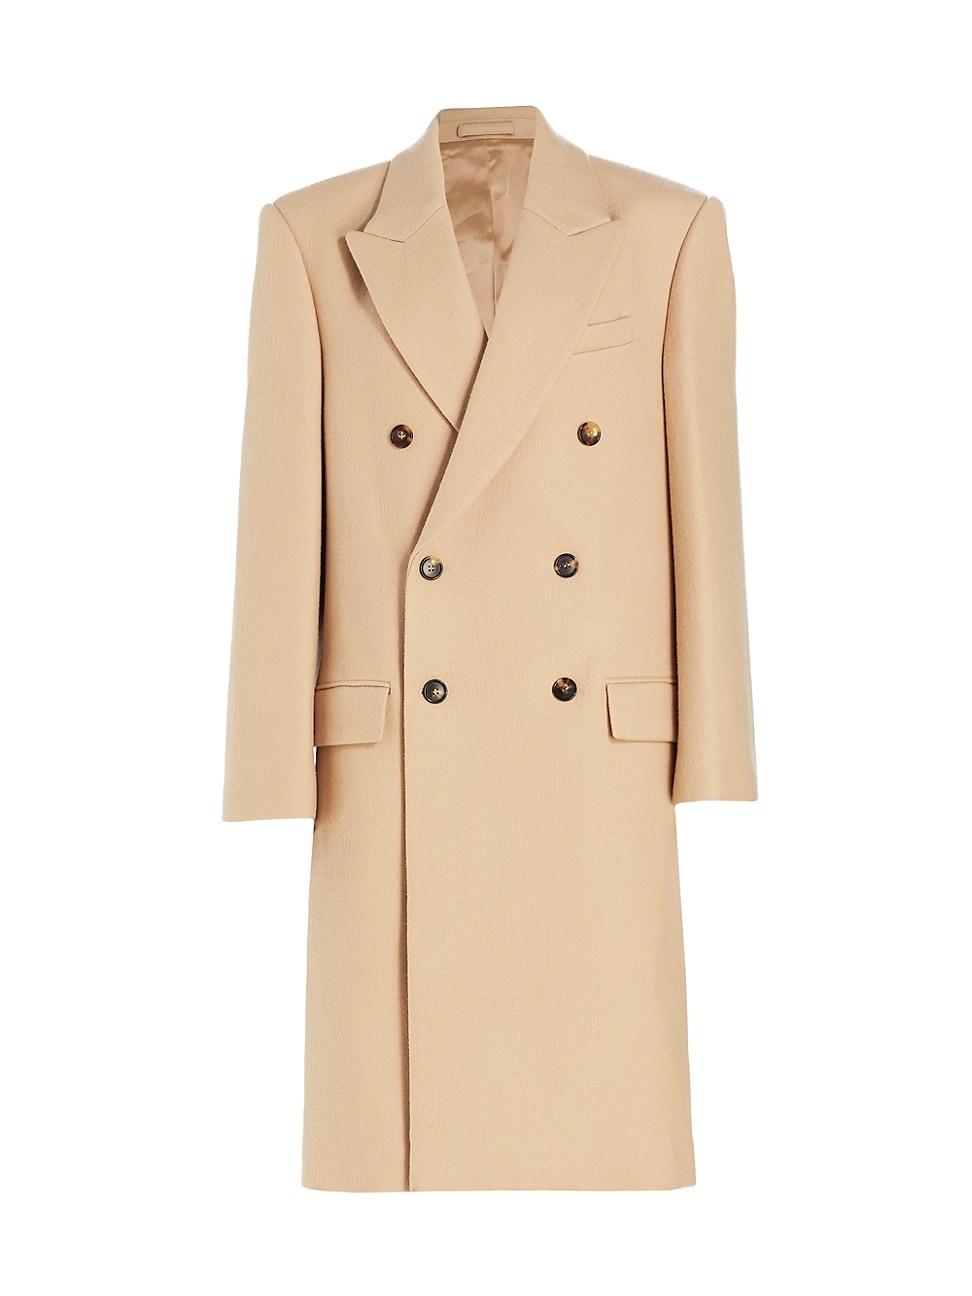 Wardrobe Nyc Hailey Bieber Double Breasted Wool Coat In Natural Lyst